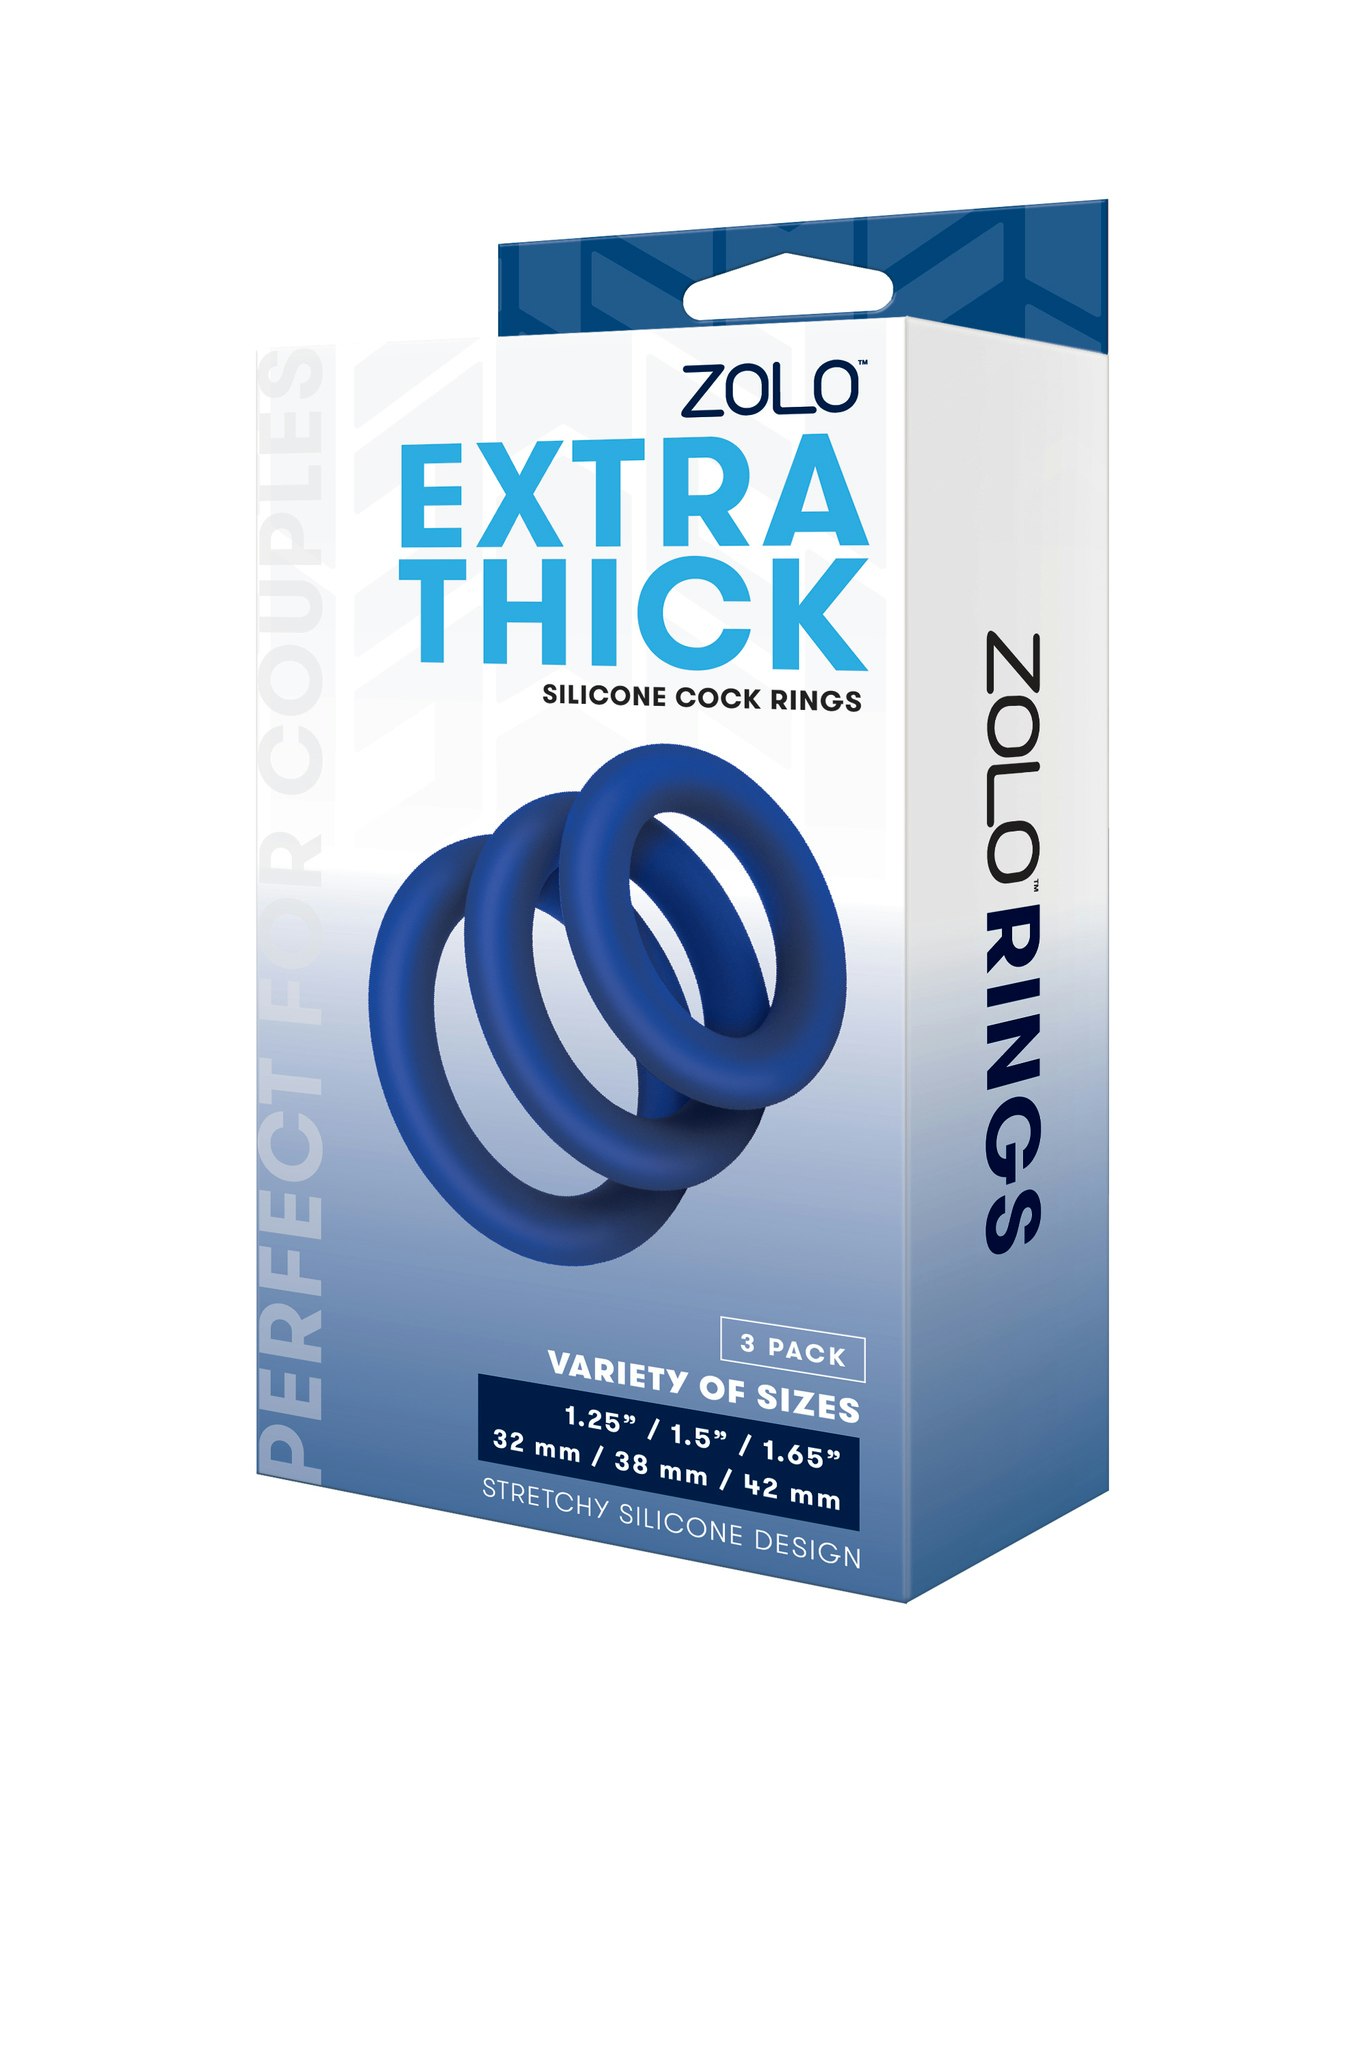 Zolo - Extra thick silicone cock rings 3 pack